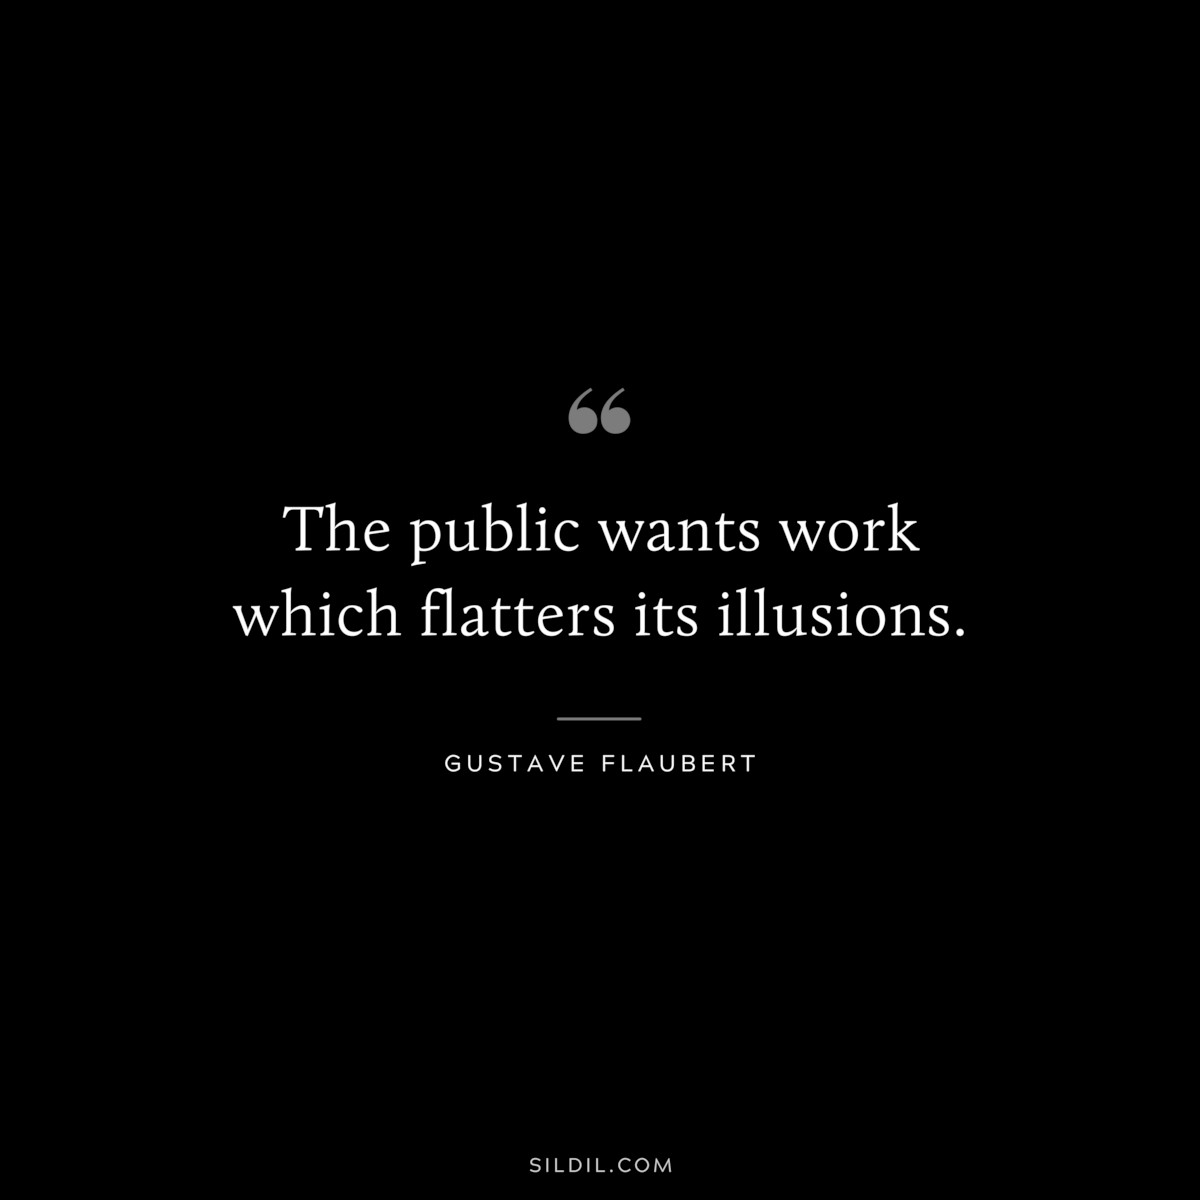 The public wants work which flatters its illusions. ― Gustave Flaubert